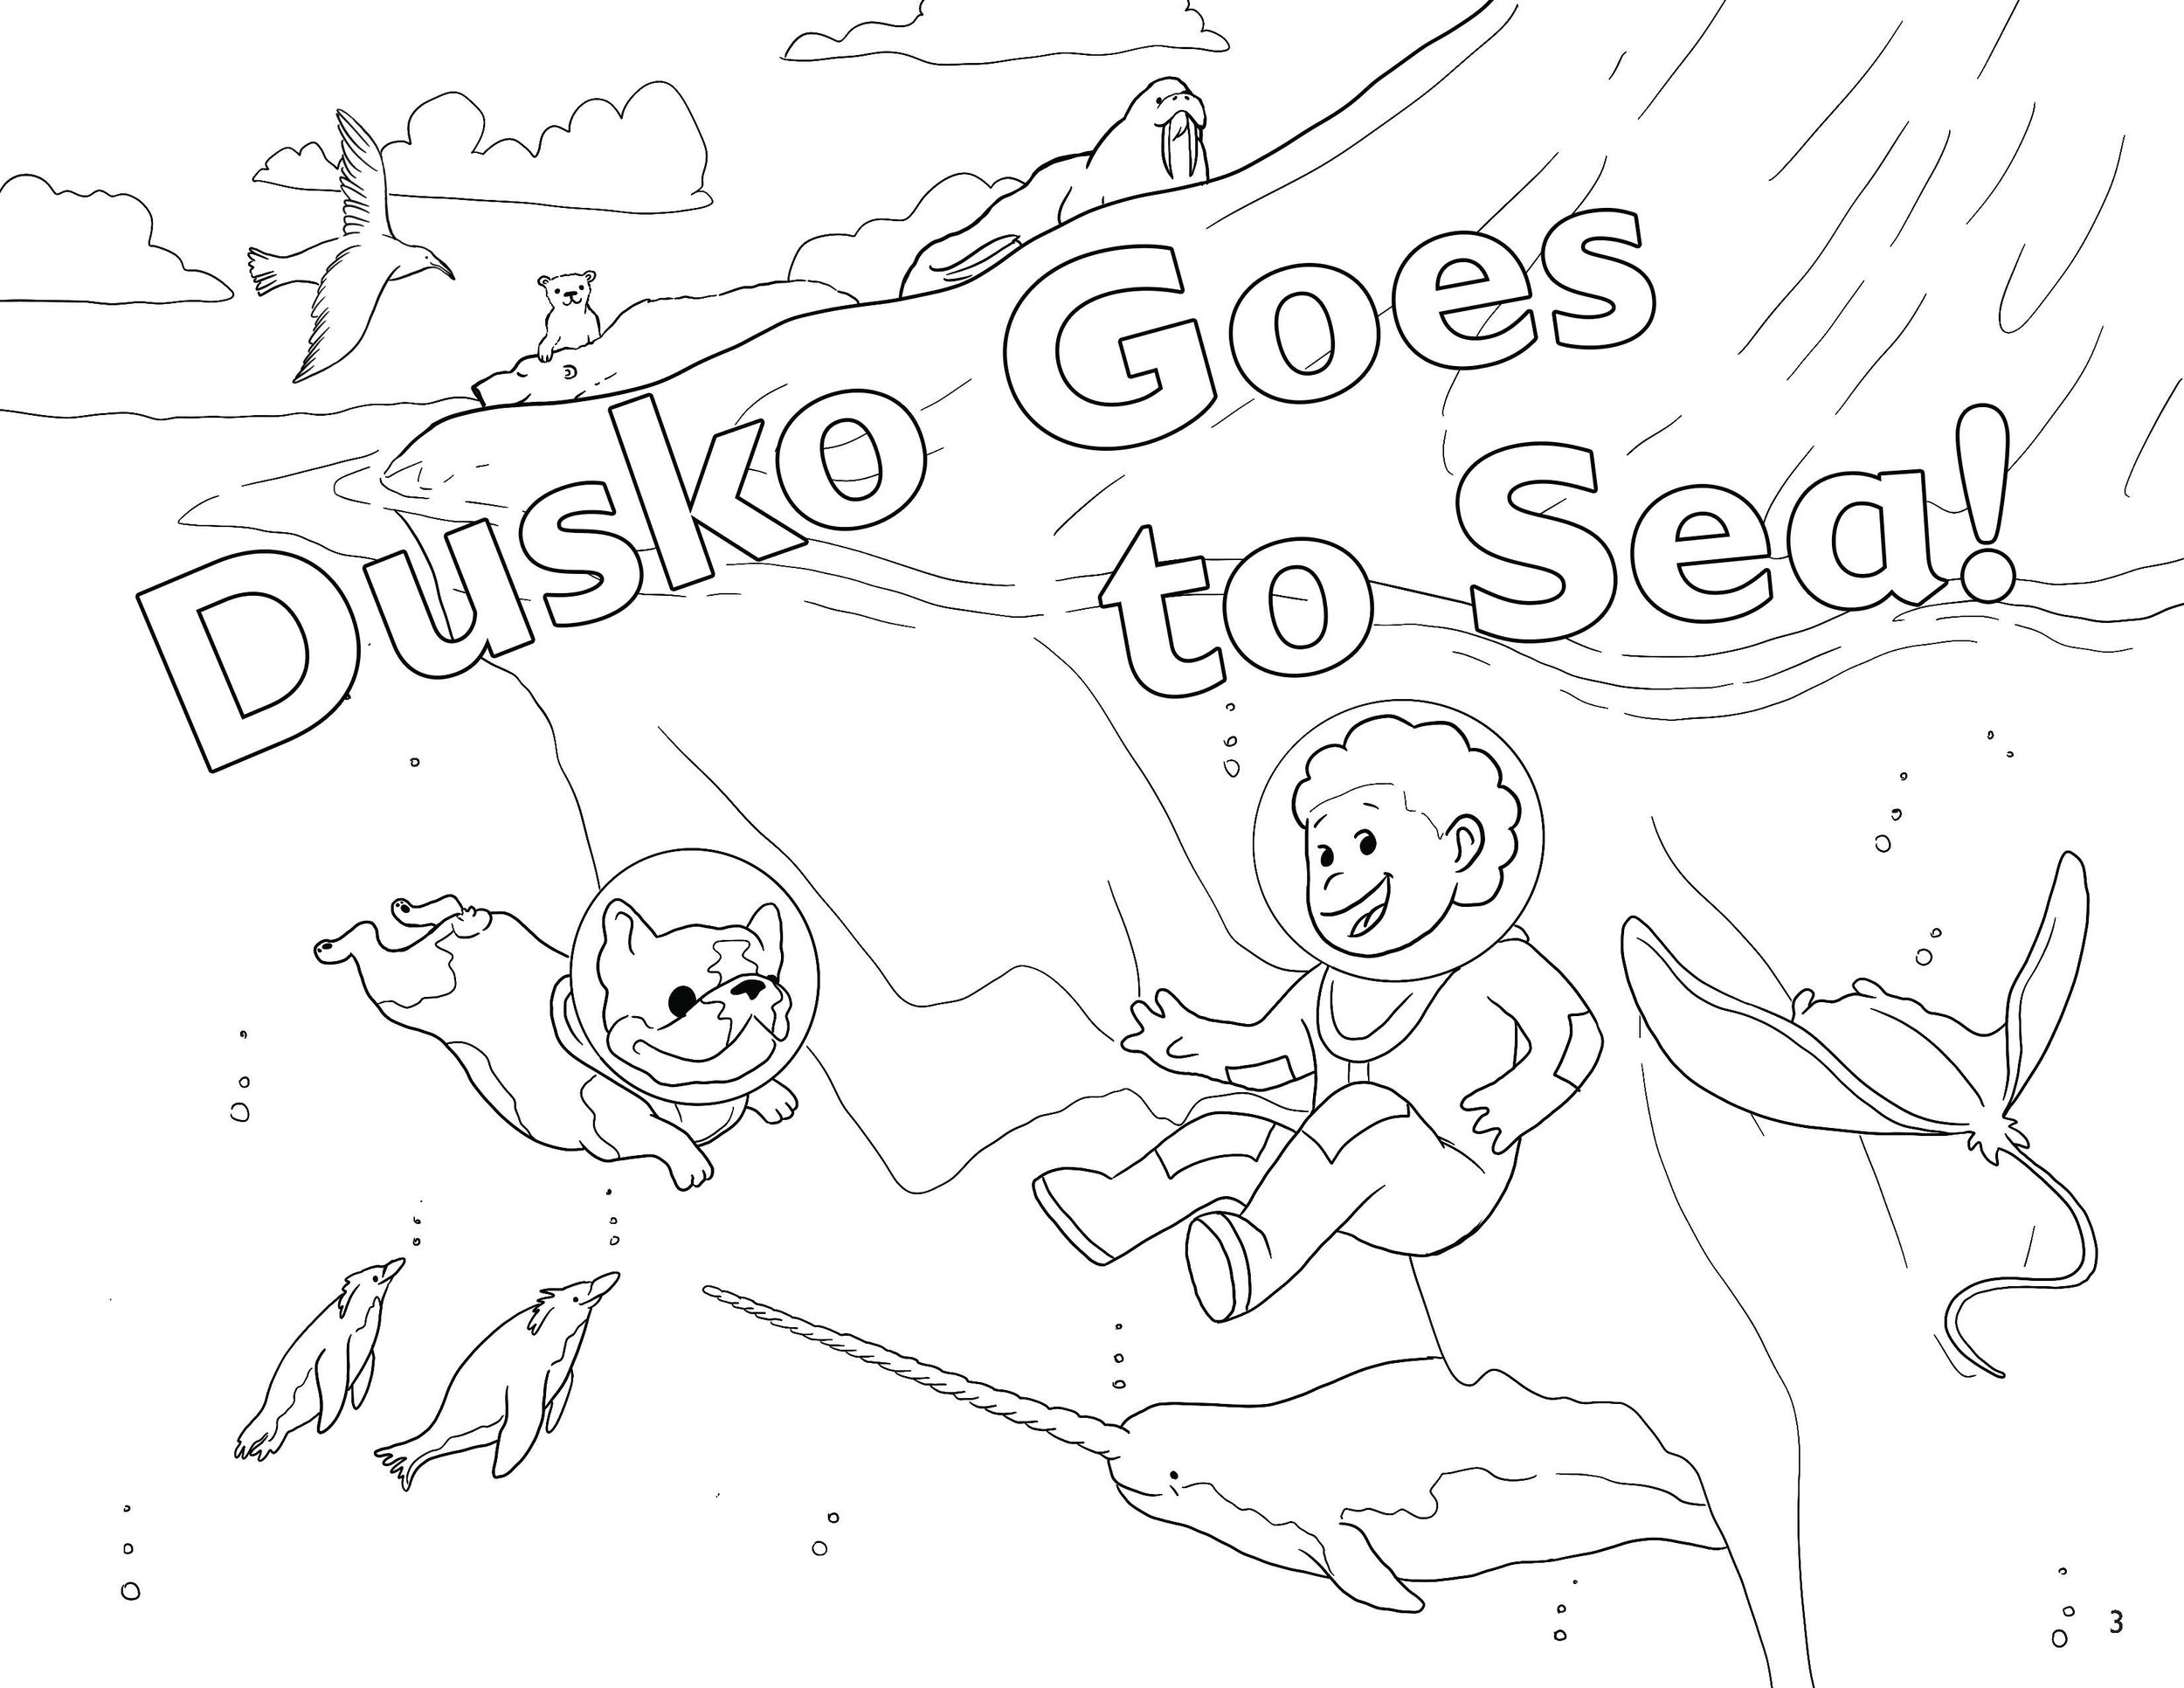 7-14Goes to Sea Coloring book_Page_03.jpg